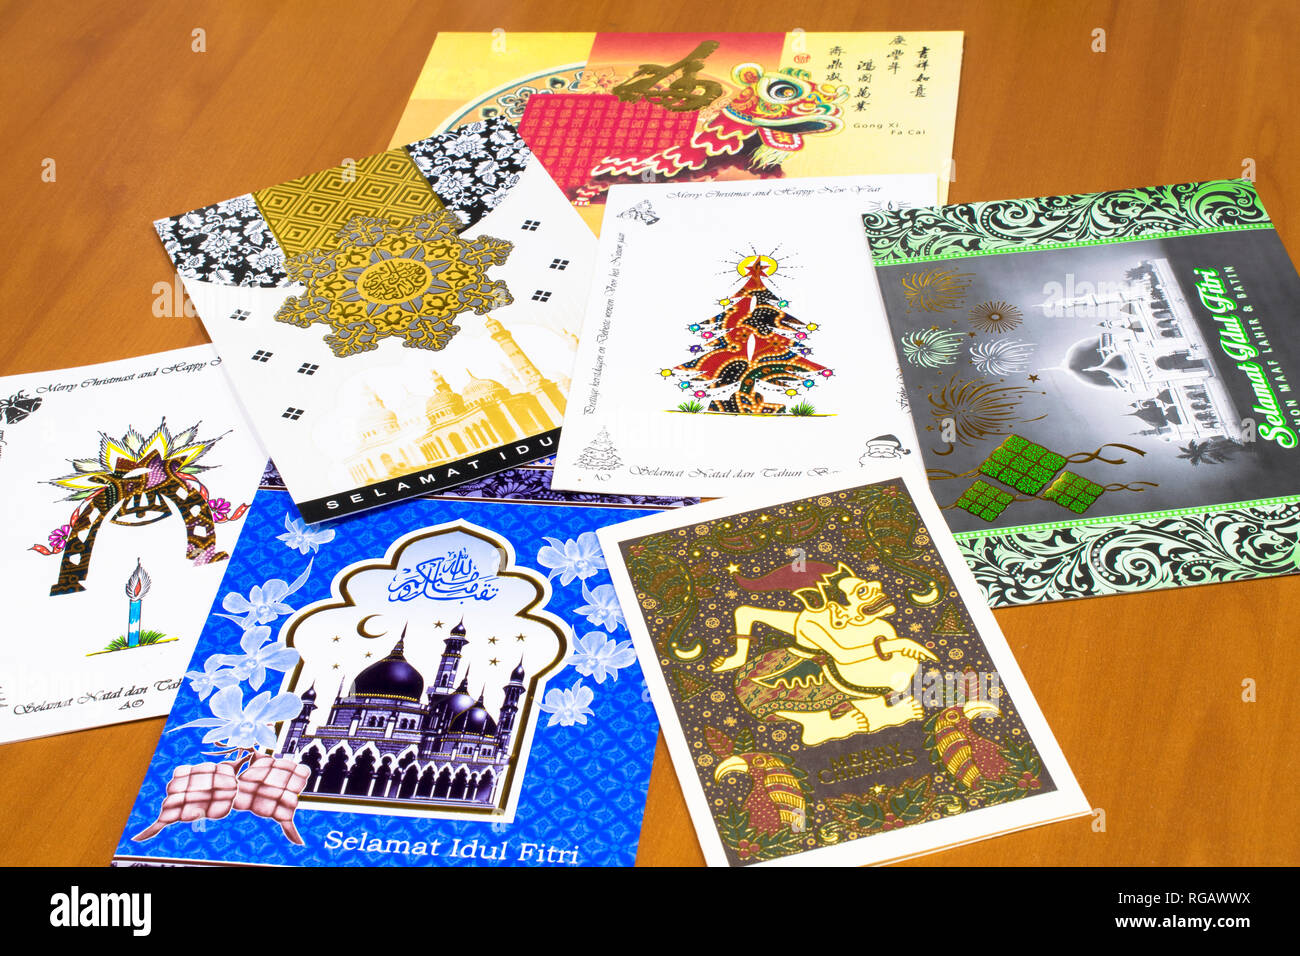 7.1, Greeting Card, IndonesianBook Stock Photo